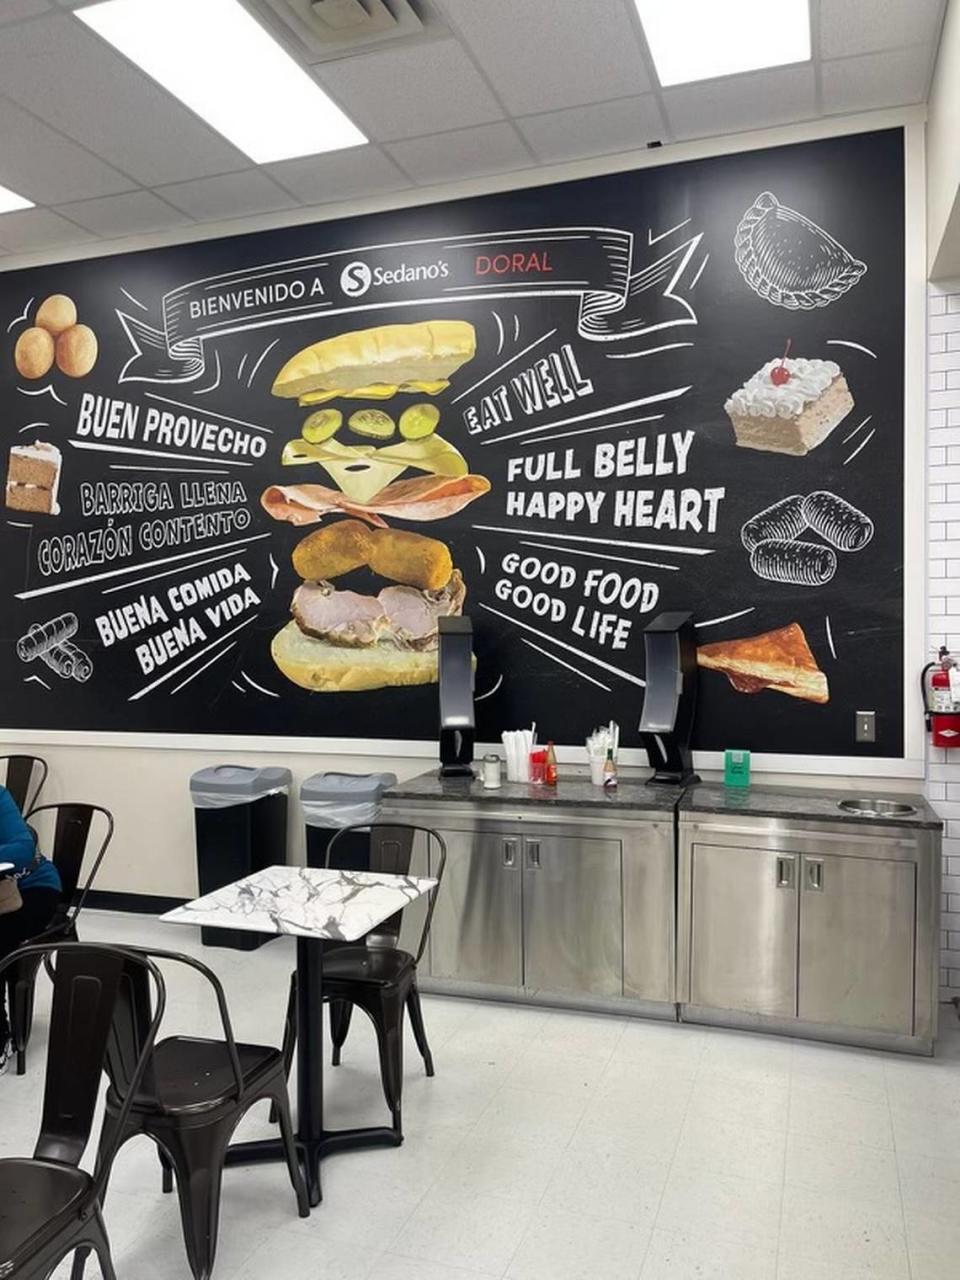 A welcoming board to the Sedano’s in-store cafe area inside its Doral grocery store.